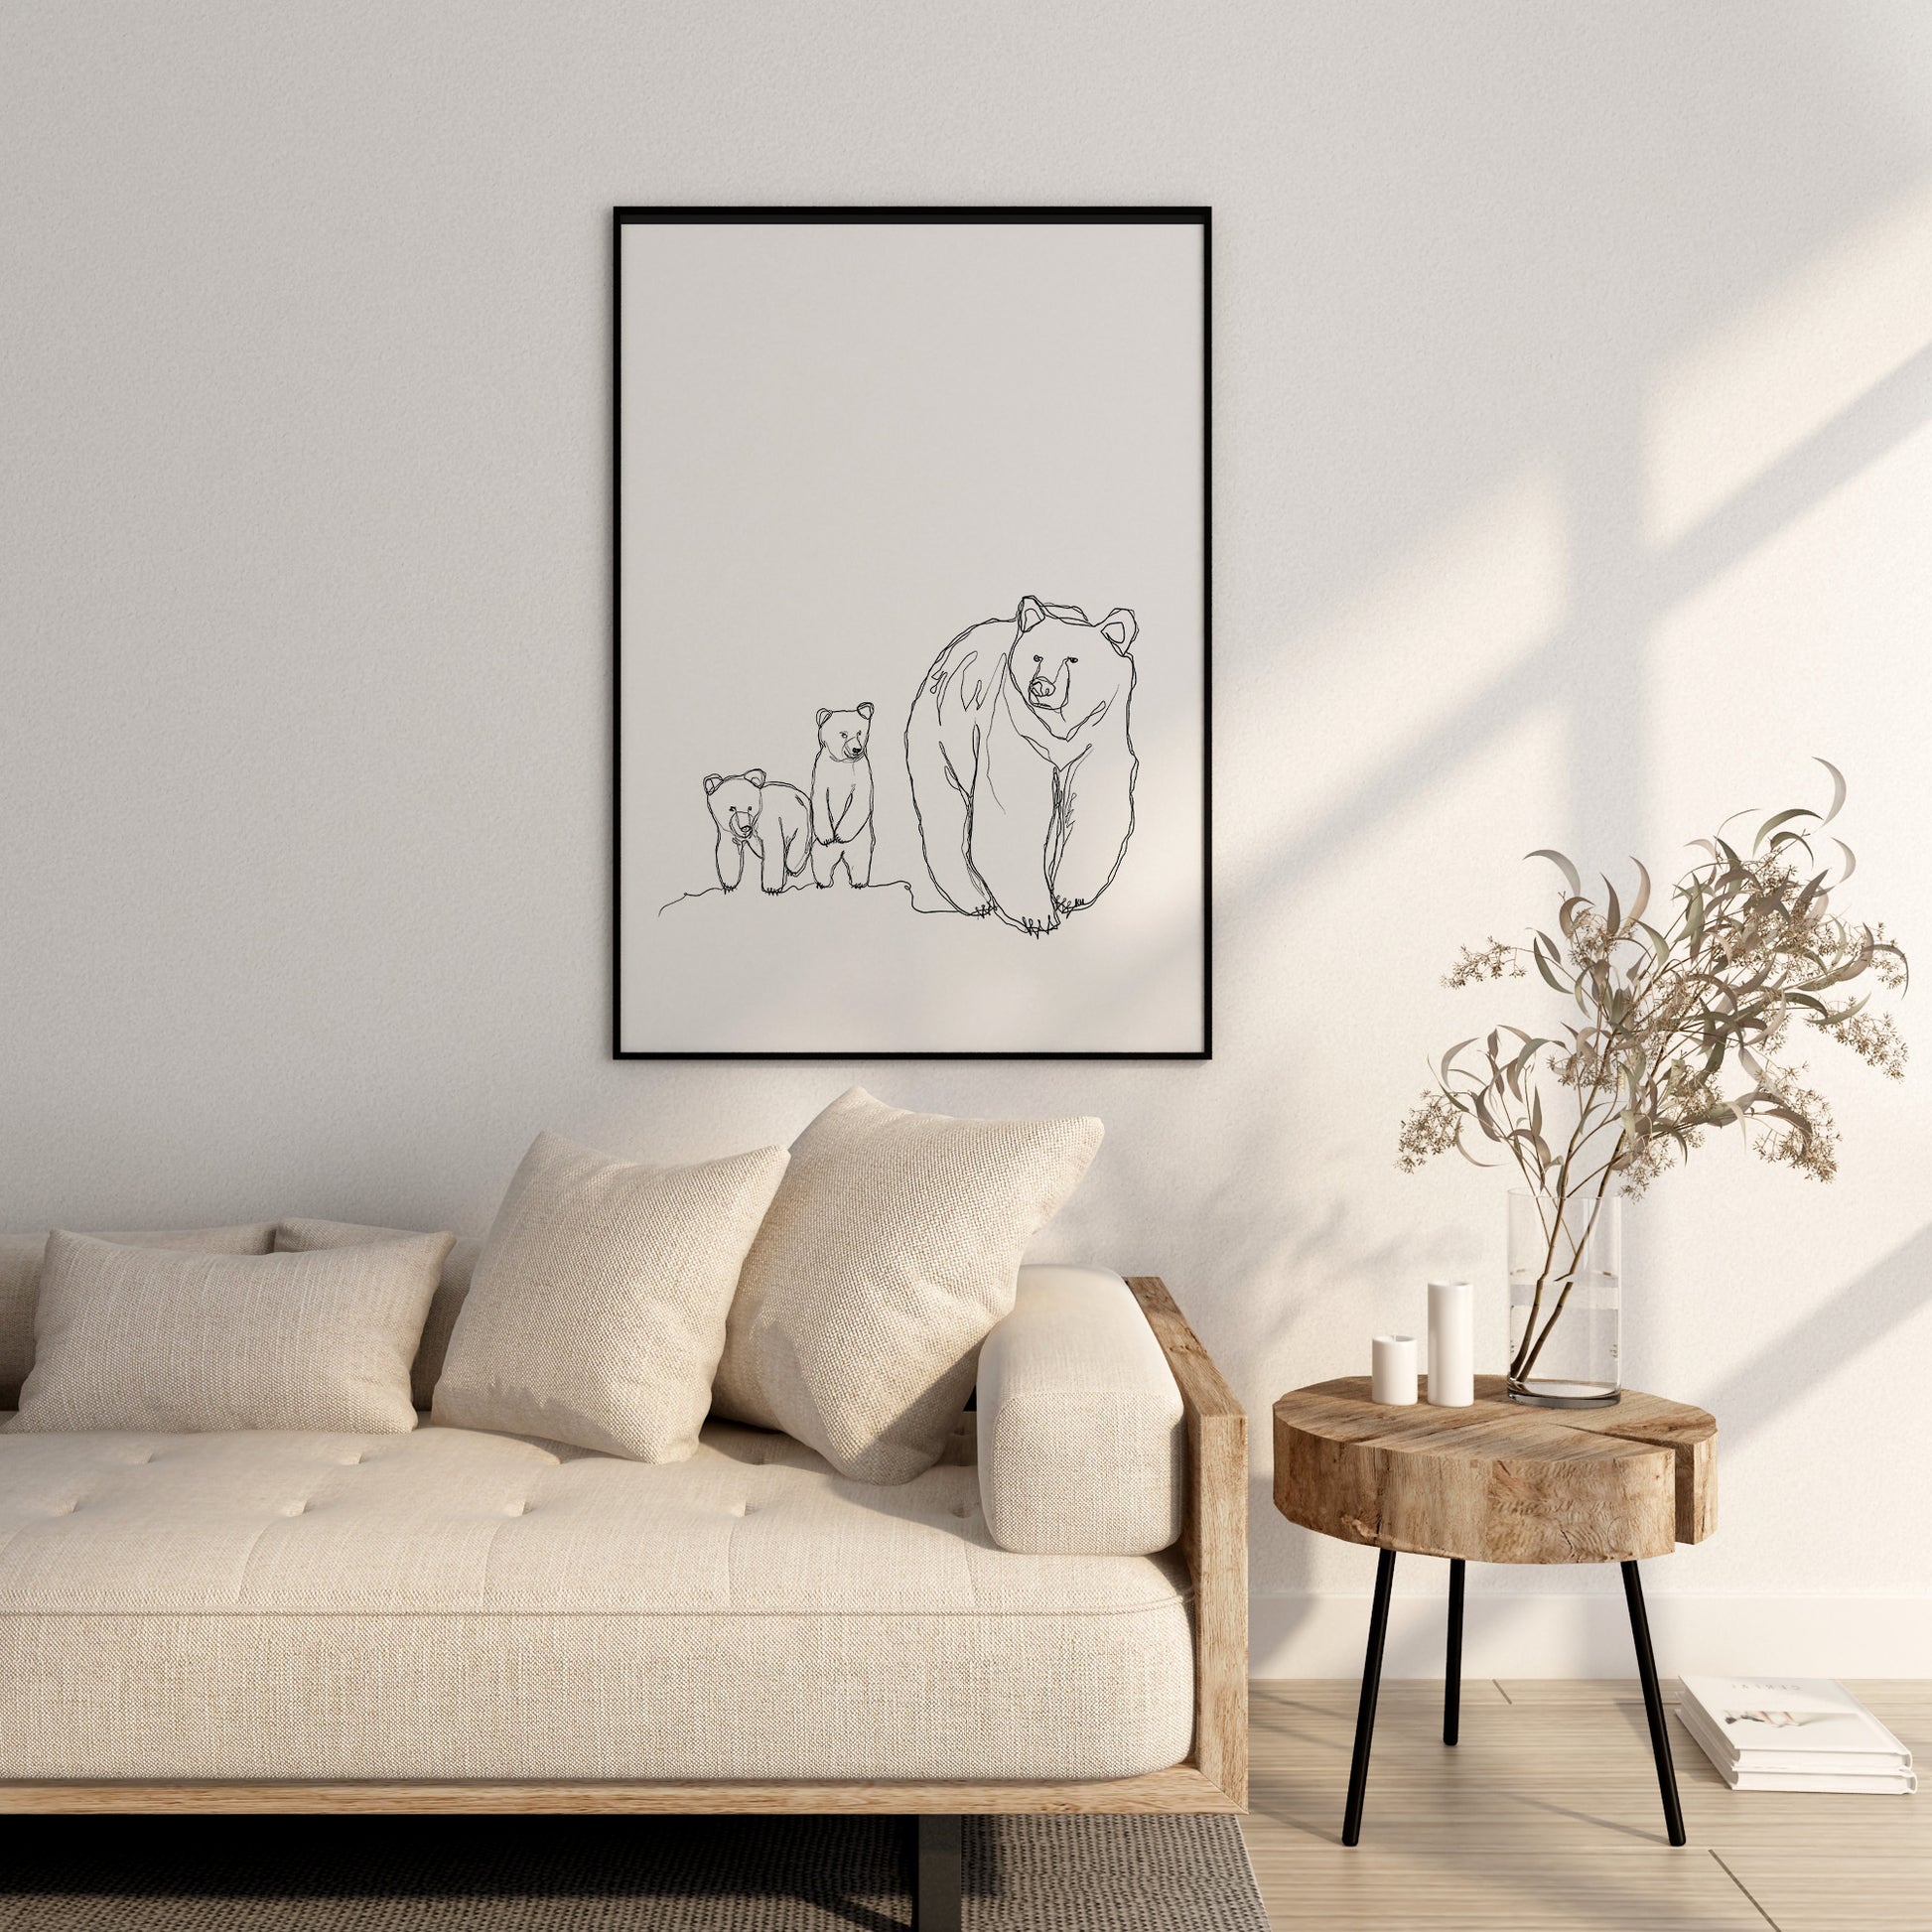 mama bear and cub line art print in large black frame as living room decor